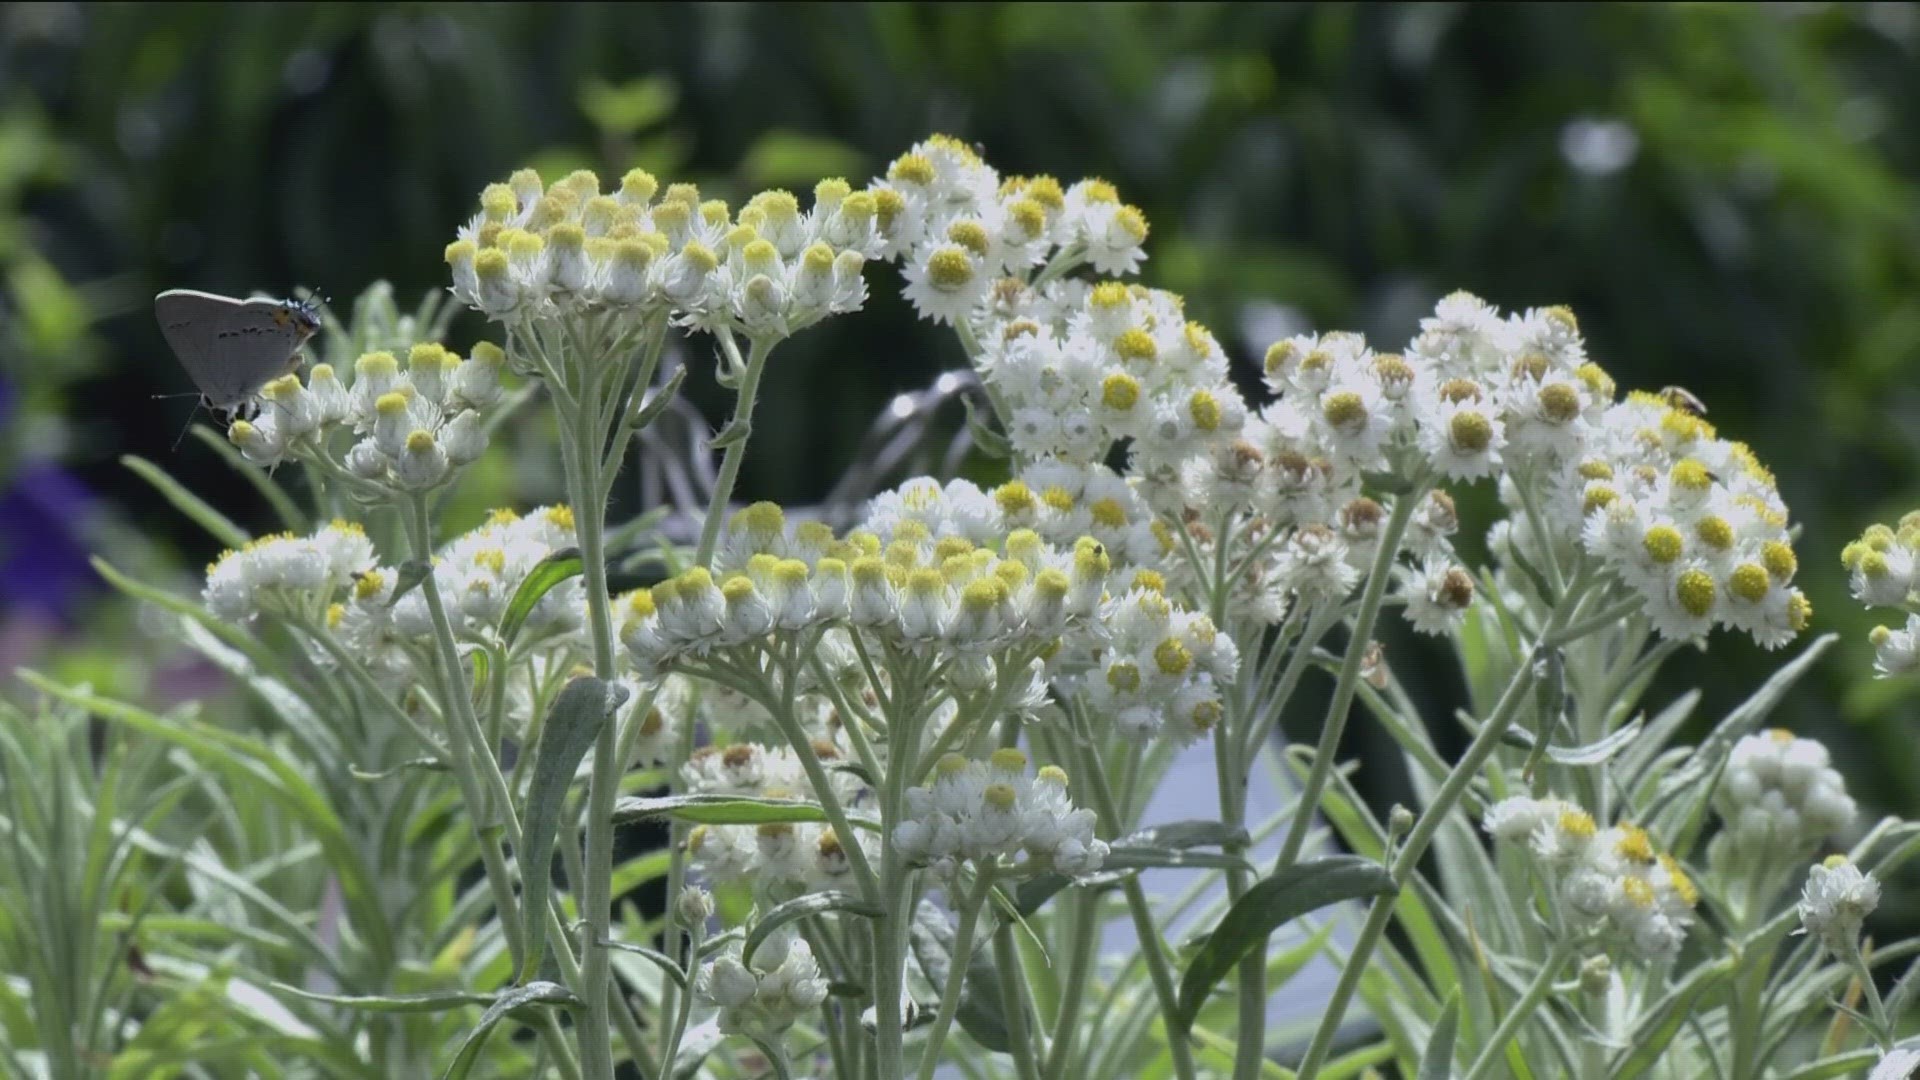 KTVB's Jim Duthie reminds us that providing a habitat for pollinators benefits all of us, and shows a few plants you can add to your garden to help attract them.